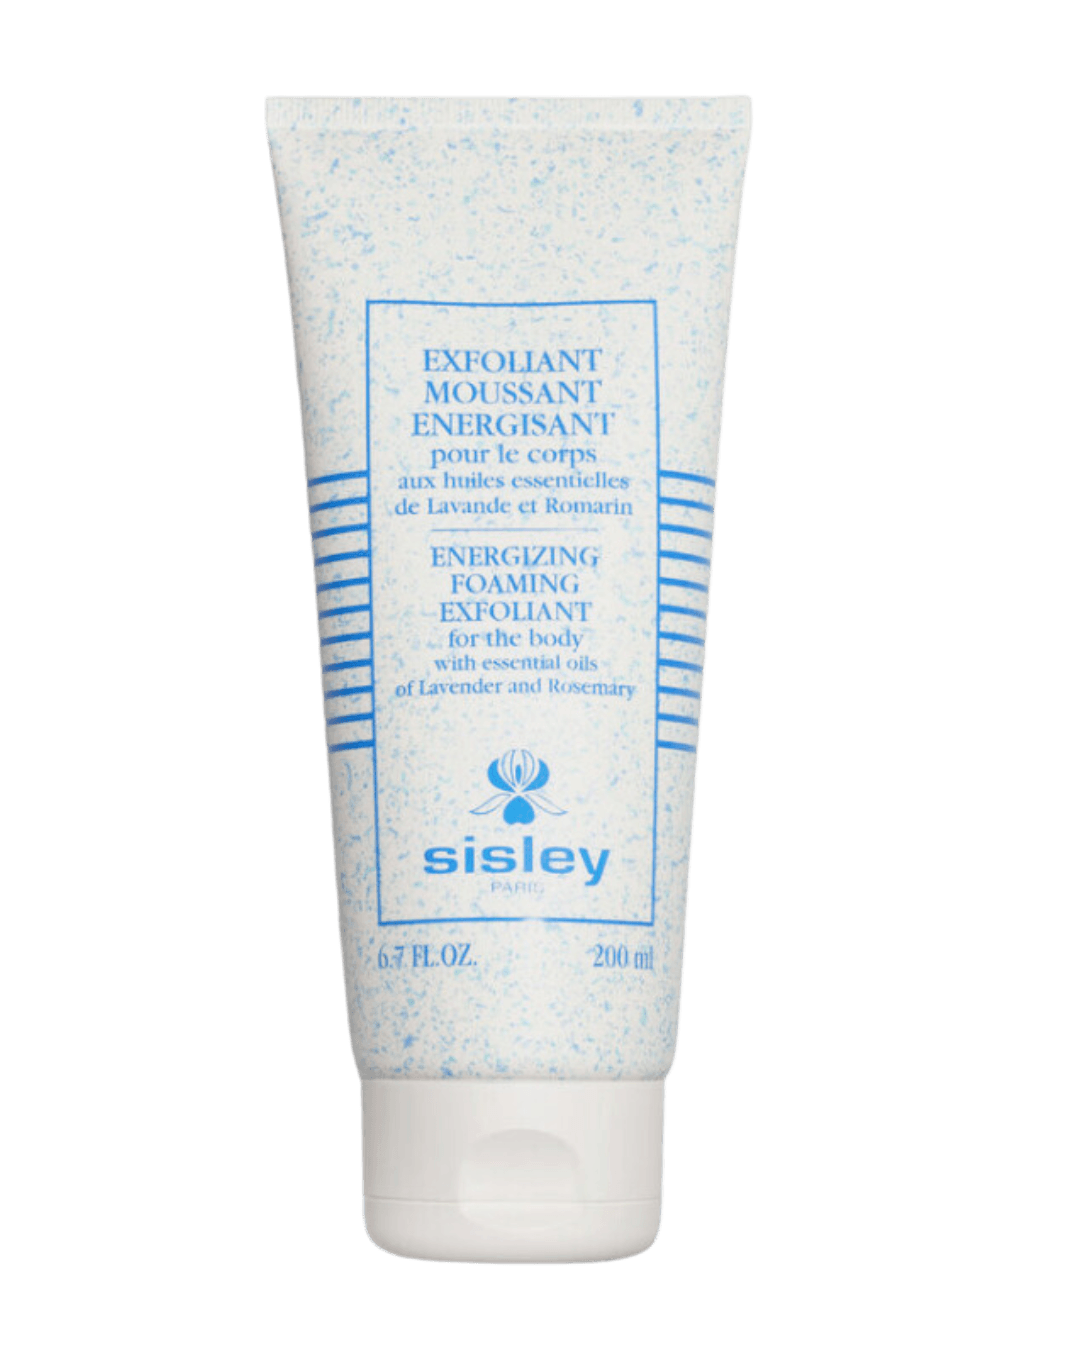 Daily Vanity Beauty Awards 2024 Best Body care Sisley Paris Energising Foaming Exfoliant For The Body Voted By Beauty Experts